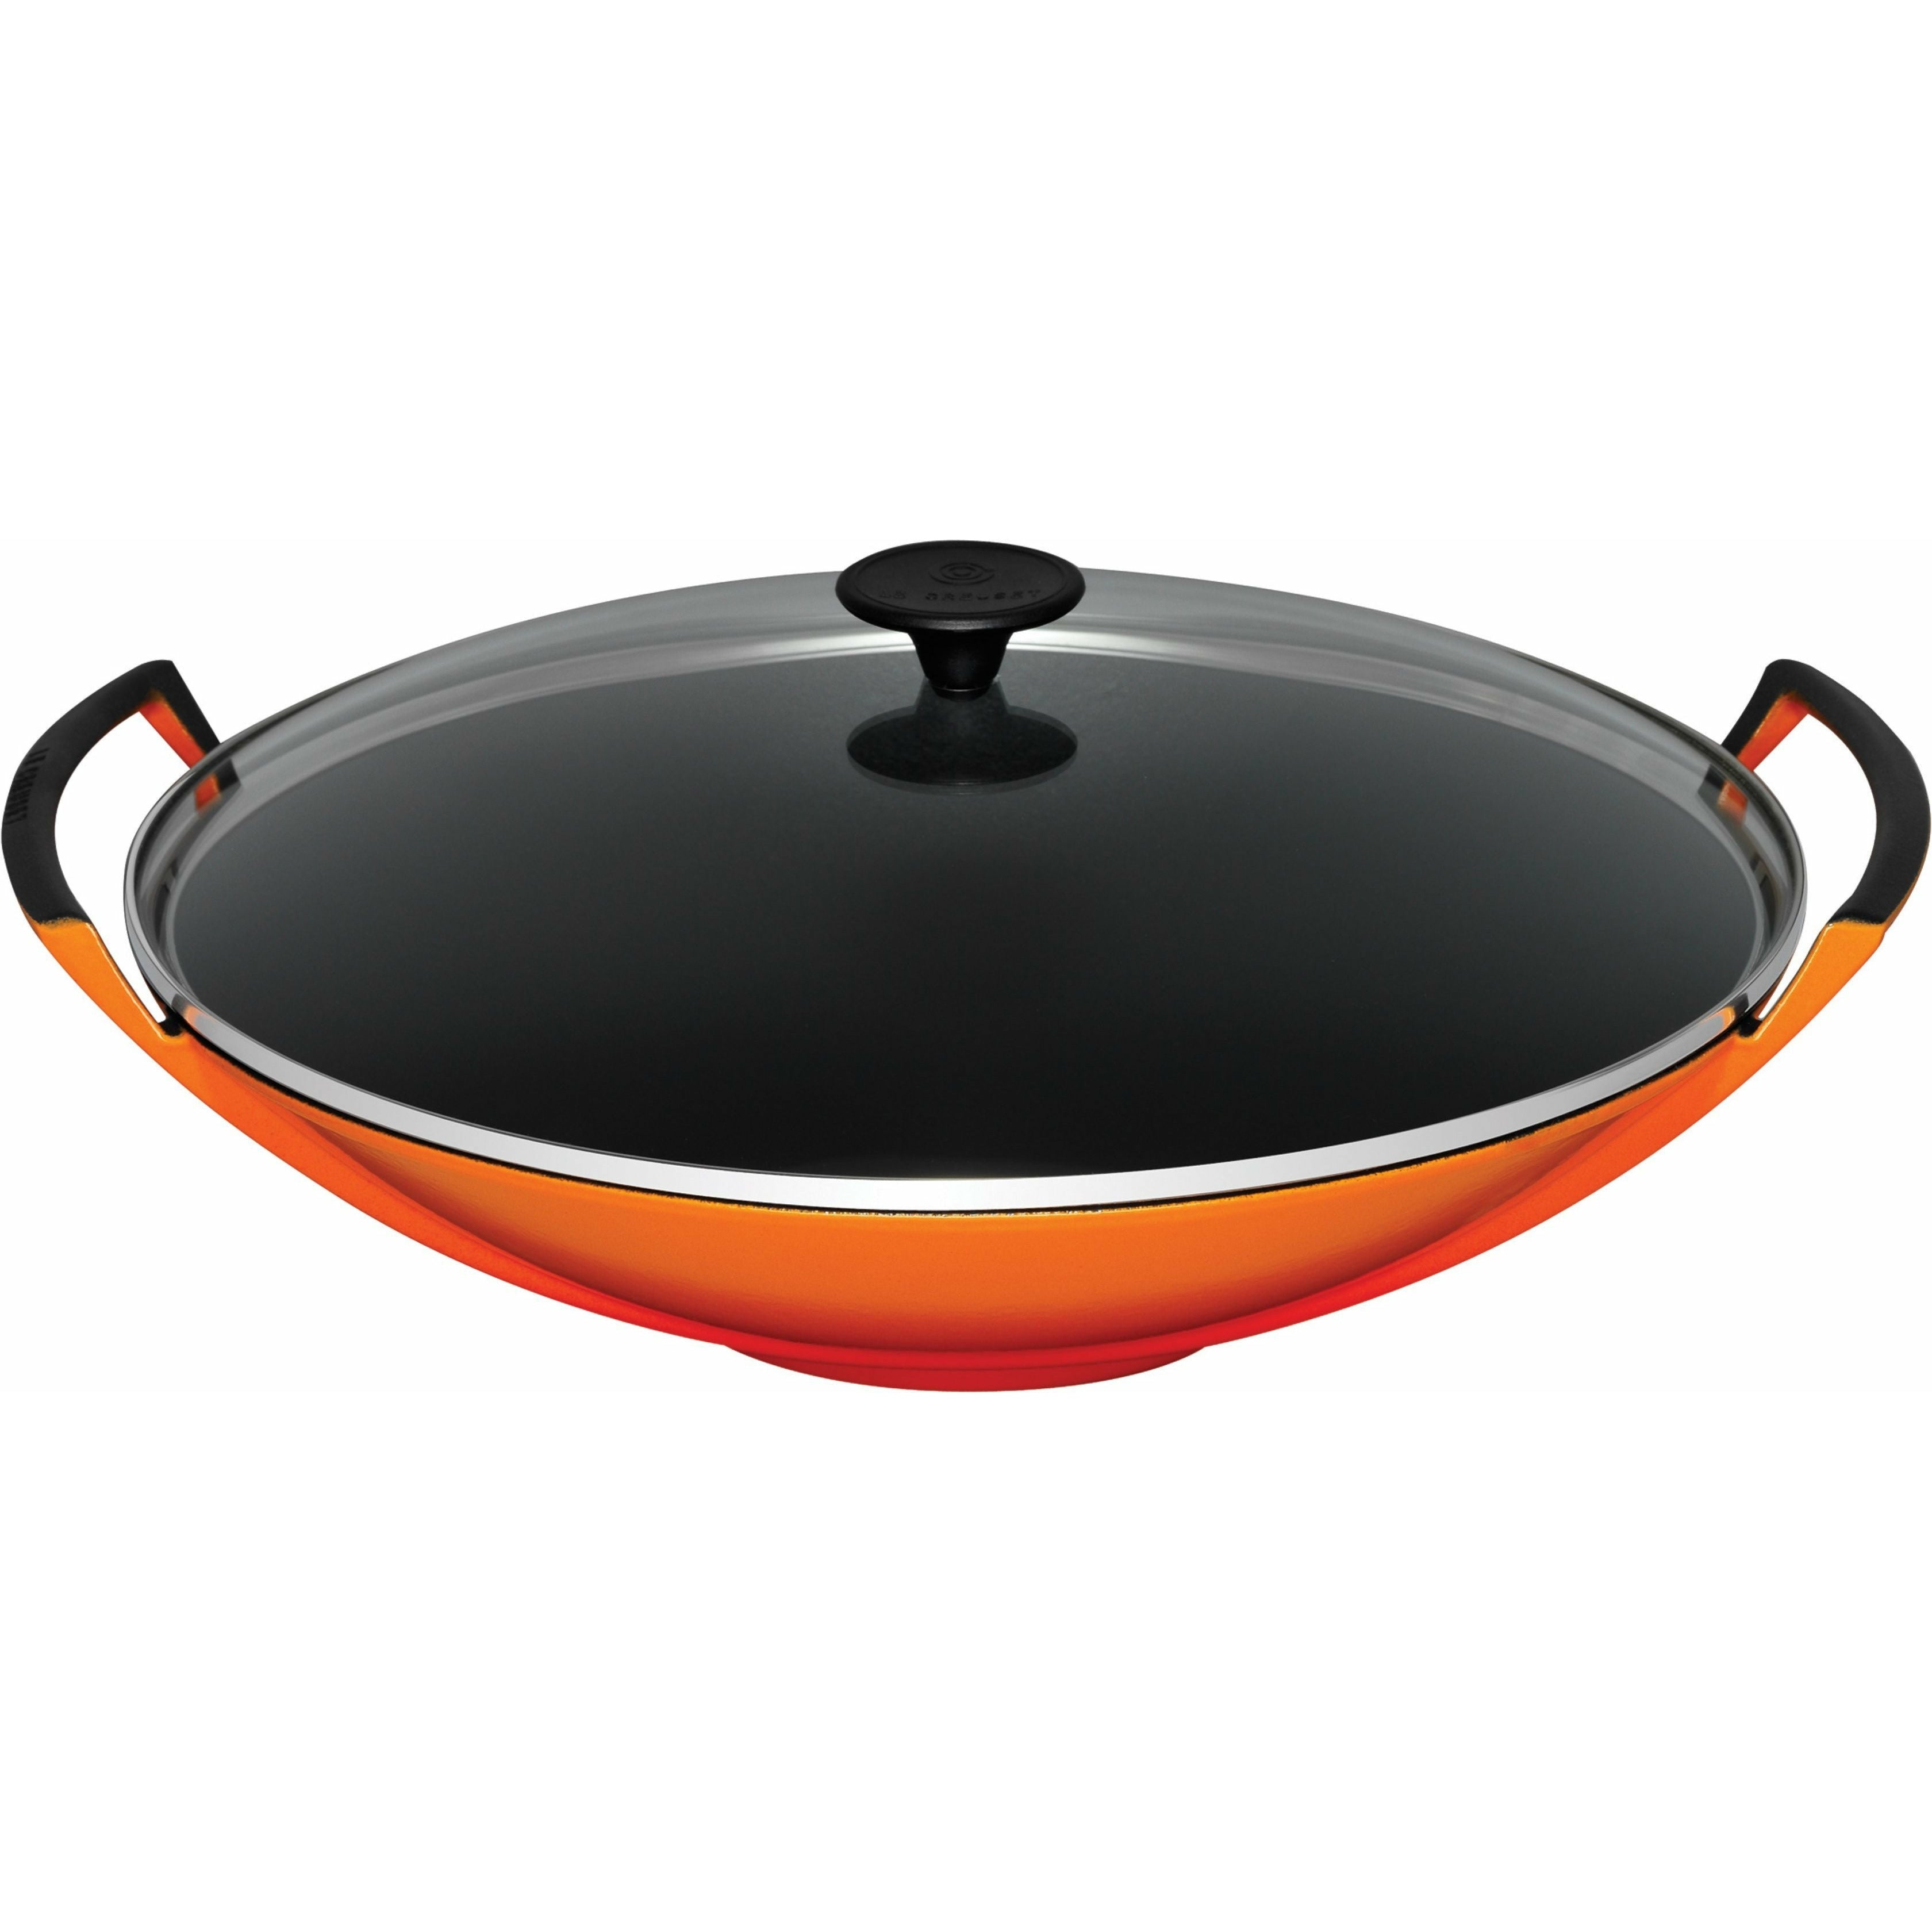 Le Creuset Wok With Glass Lid 36 Cm, Oven Red